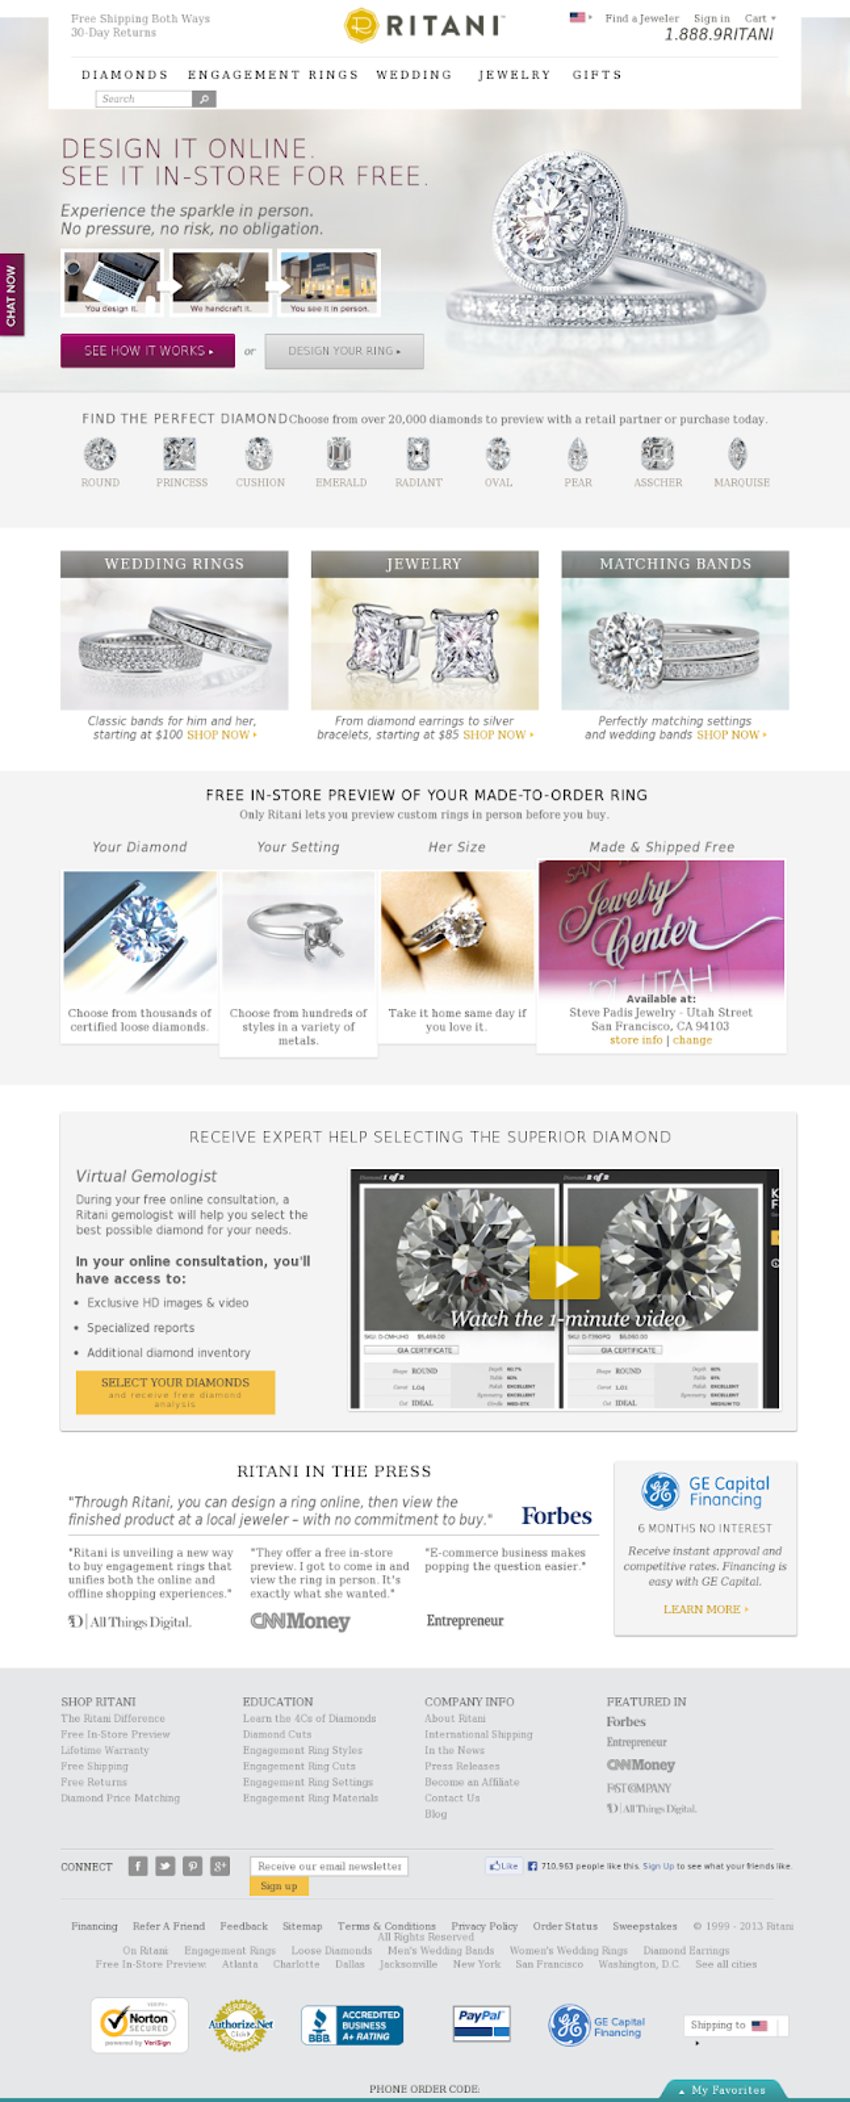 on-starting-a-business-selling-diamonds-and-engagement-rings-online